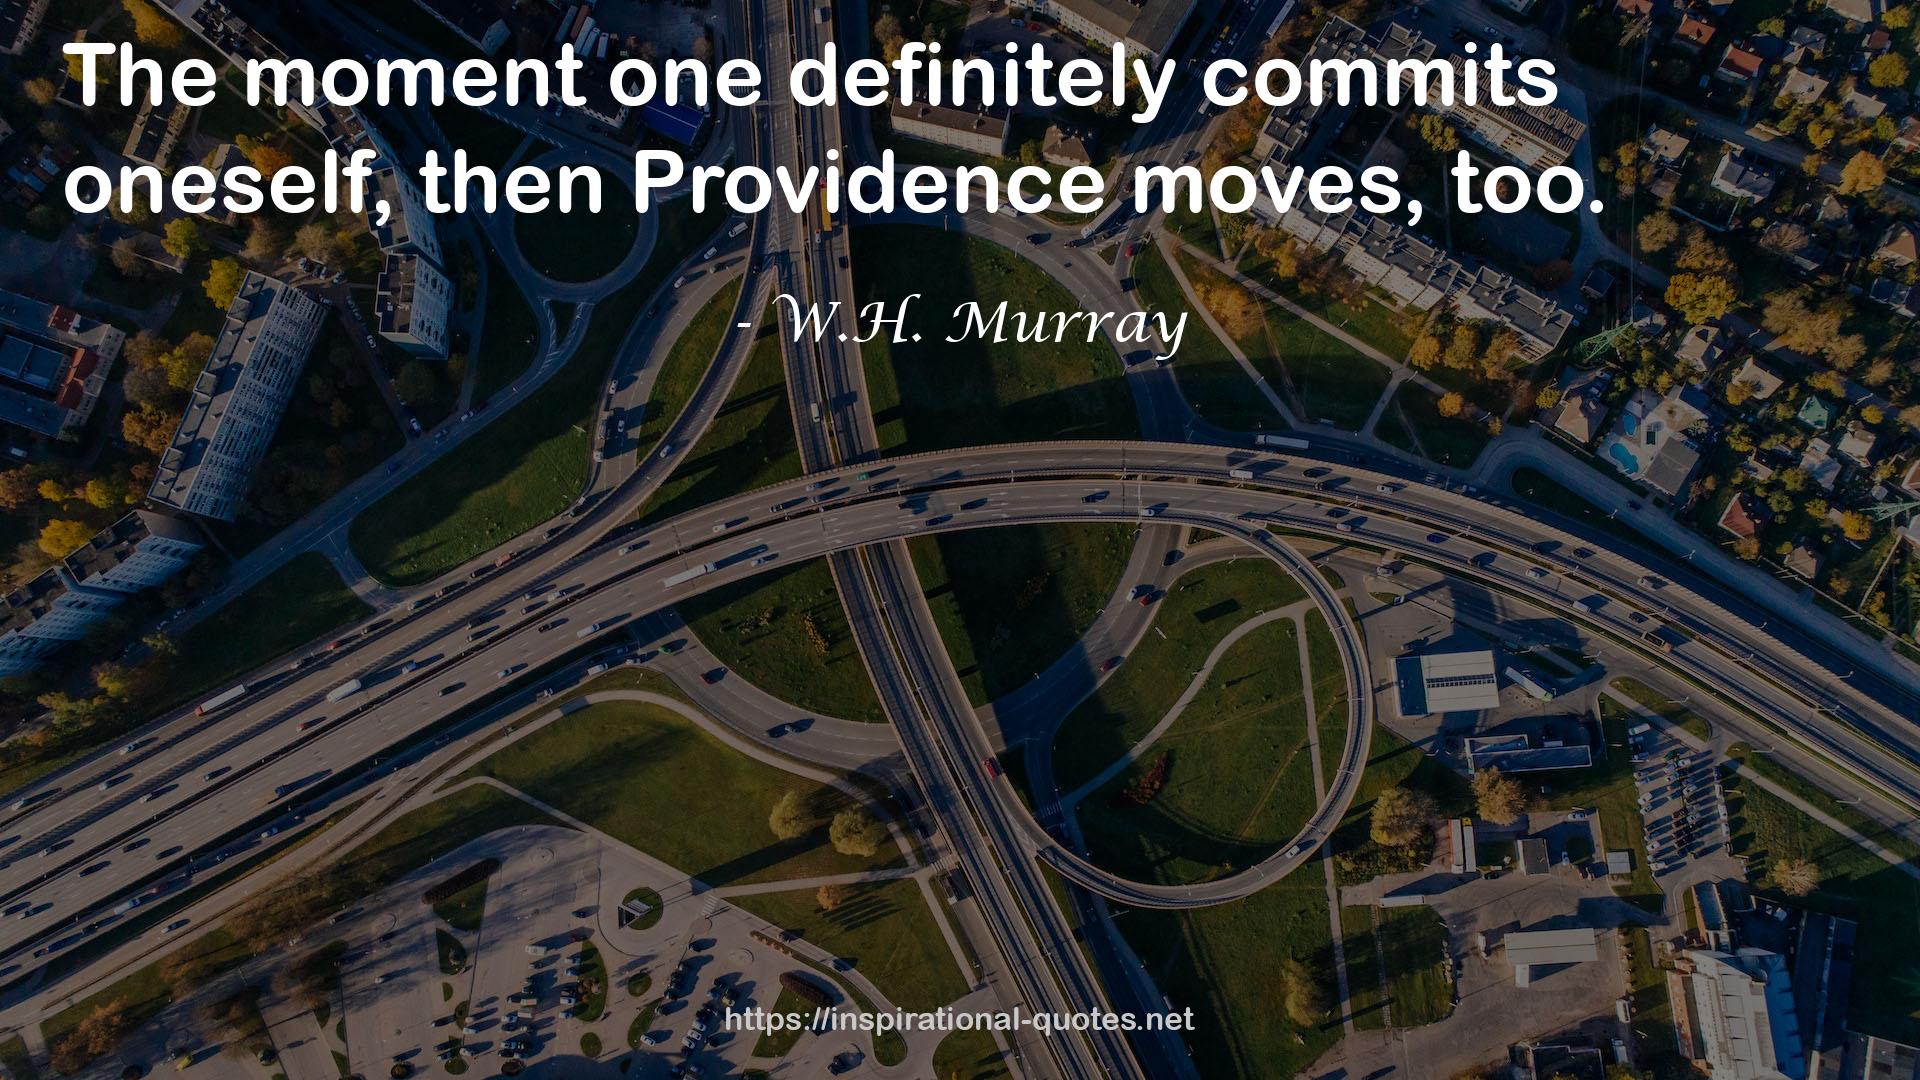 W.H. Murray QUOTES